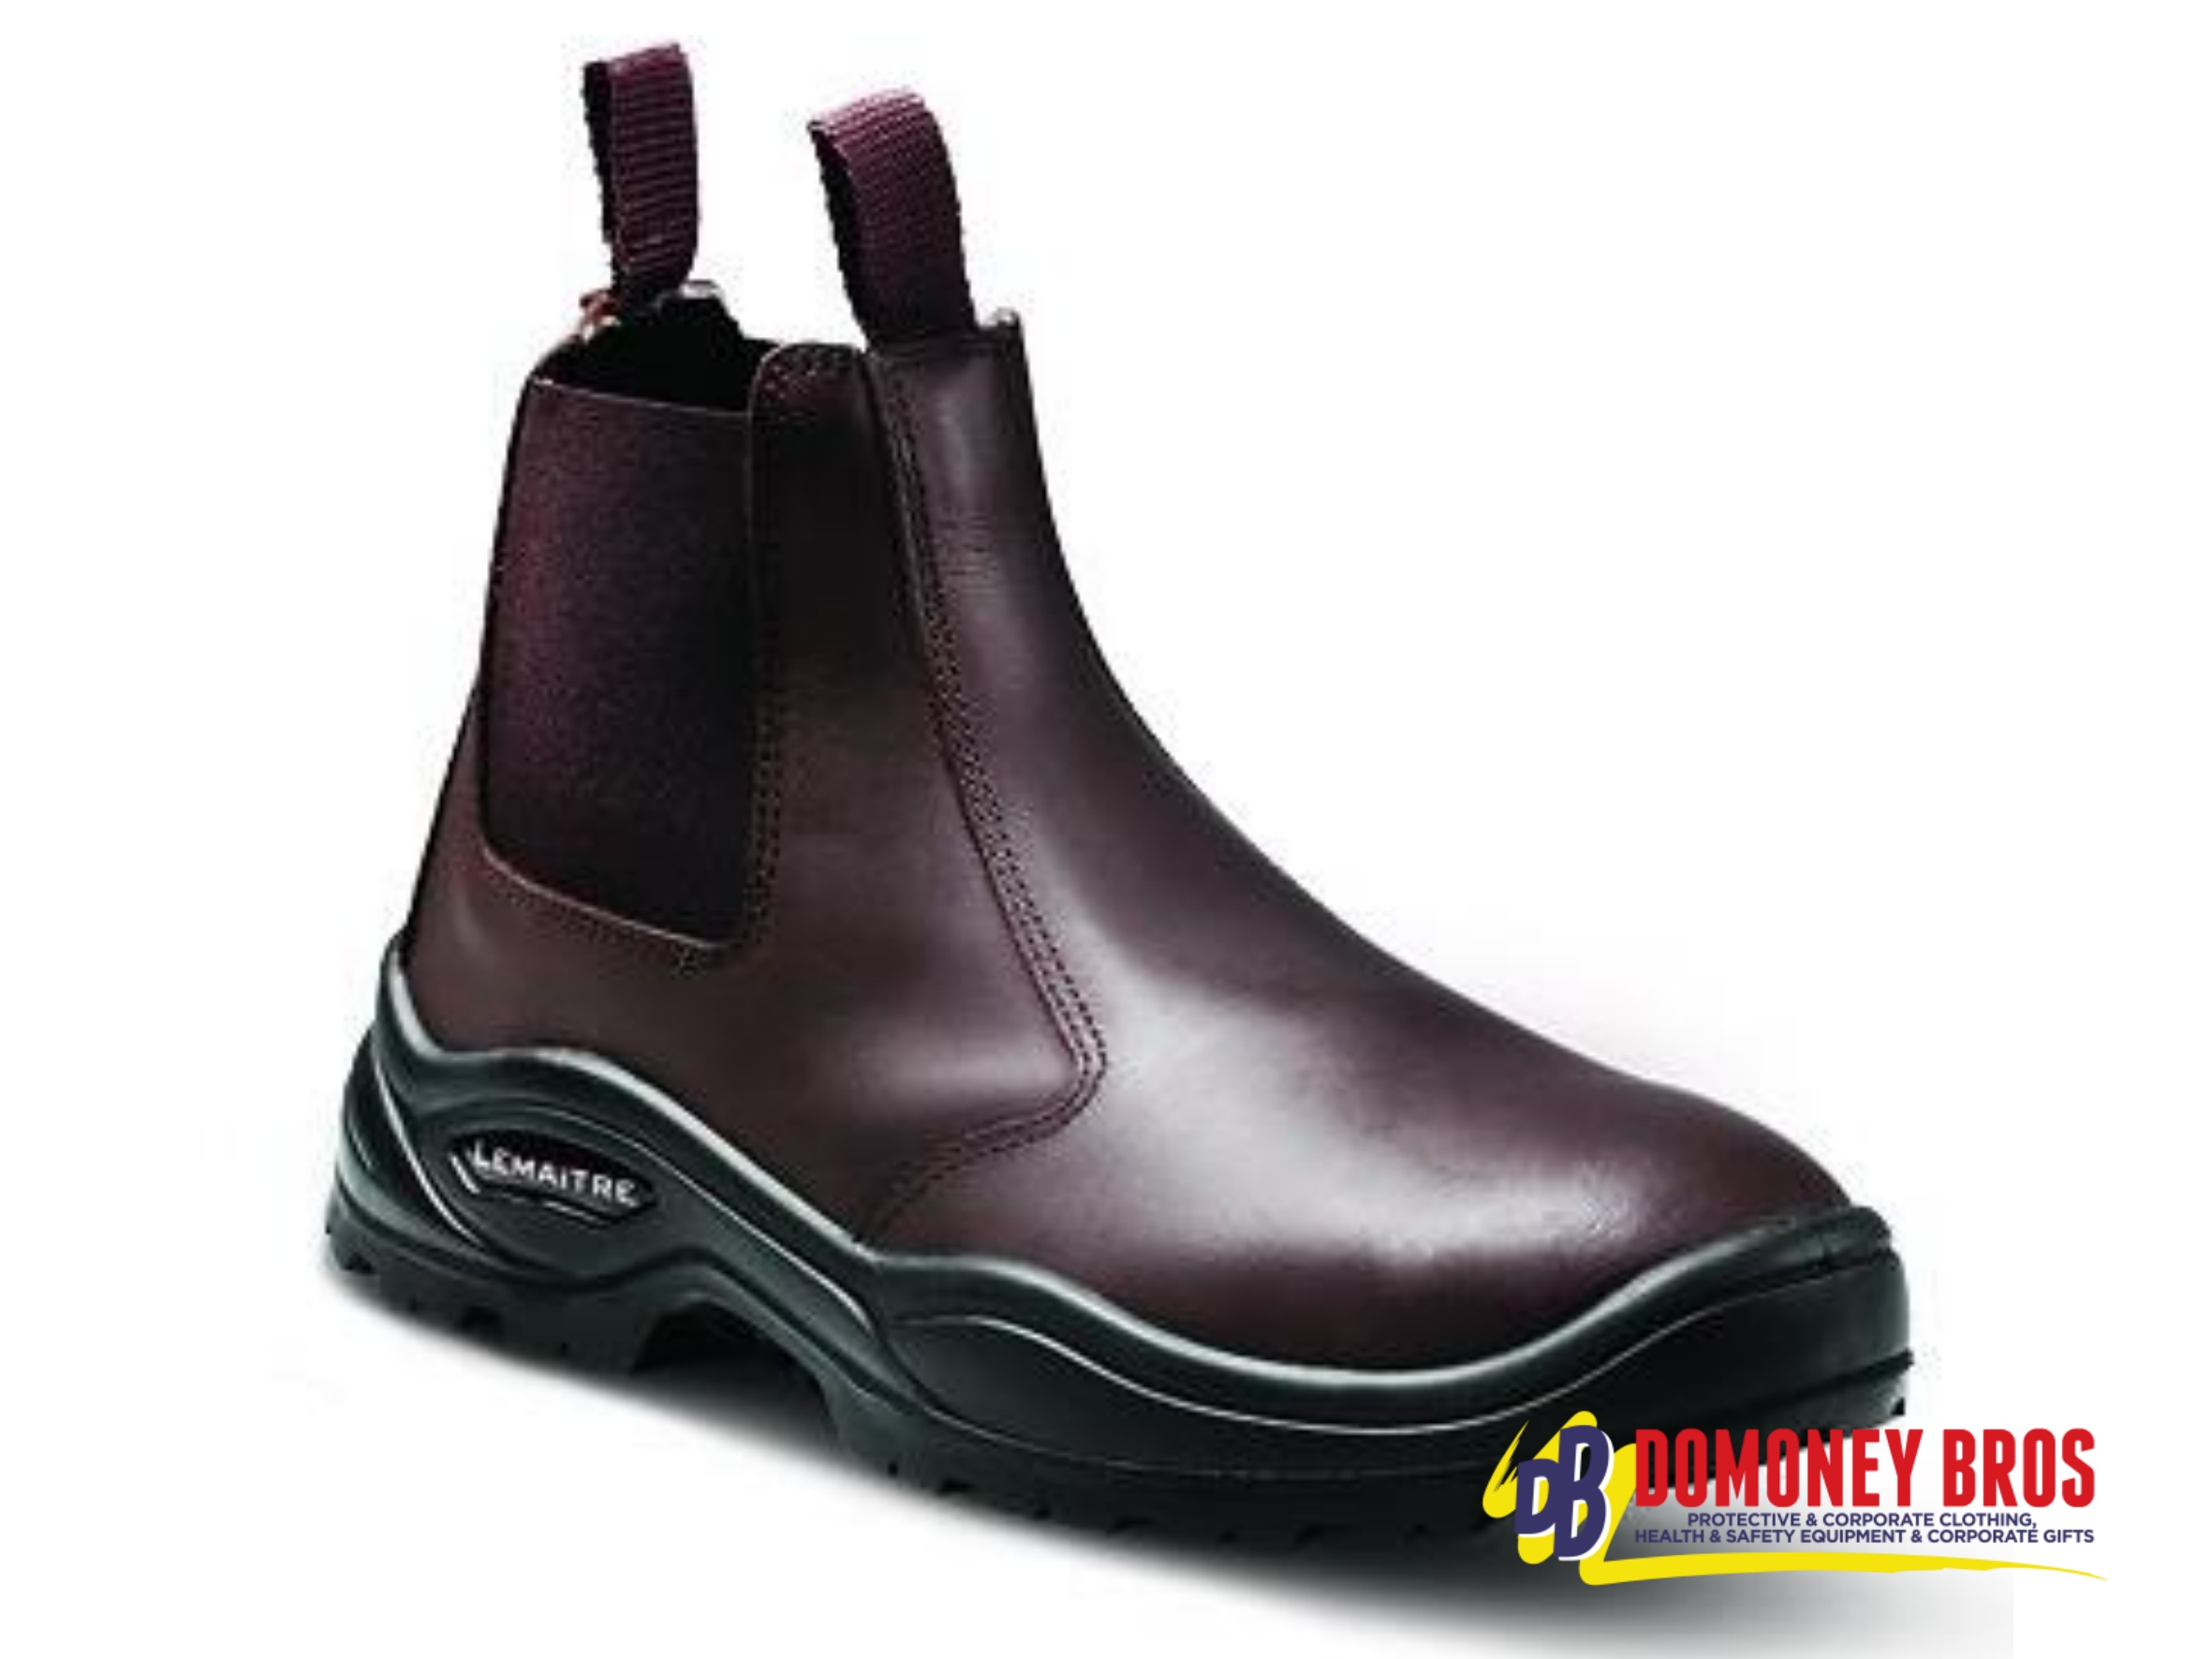 lemaitre safety shoes